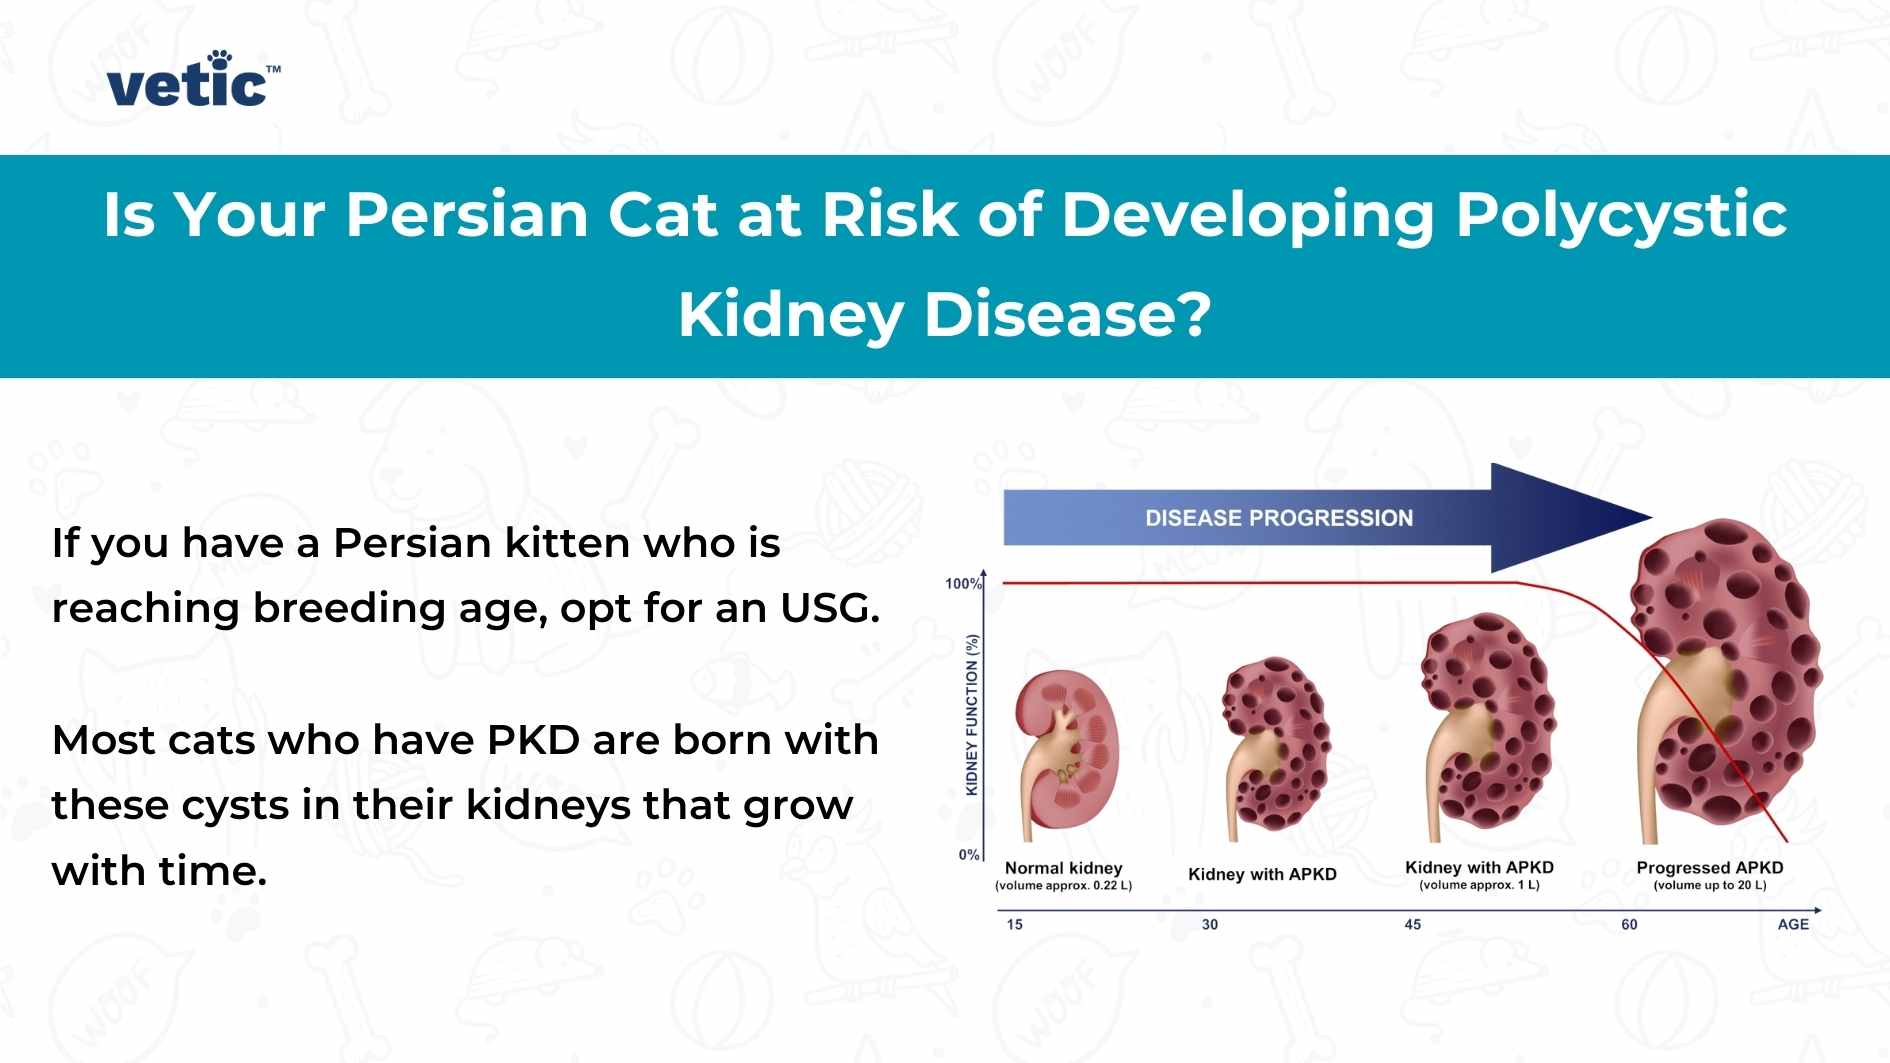 vetic® Is Your Persian Cat at Risk of Developing Polycystic Kidney Disease? If you have a Persian kitten who is reaching breeding age, opt for an USG. Most cats who have PKD are born with these cysts in their kidneys that grow with time. DISEASE PROGRESSION Normal Kidney (normal cysts, 0-15) Kidney with APKD (mild cysts, 15-30) Kidney with APKD (moderate cysts, 30-45) Progressed APKD (severe cysts, 45+)